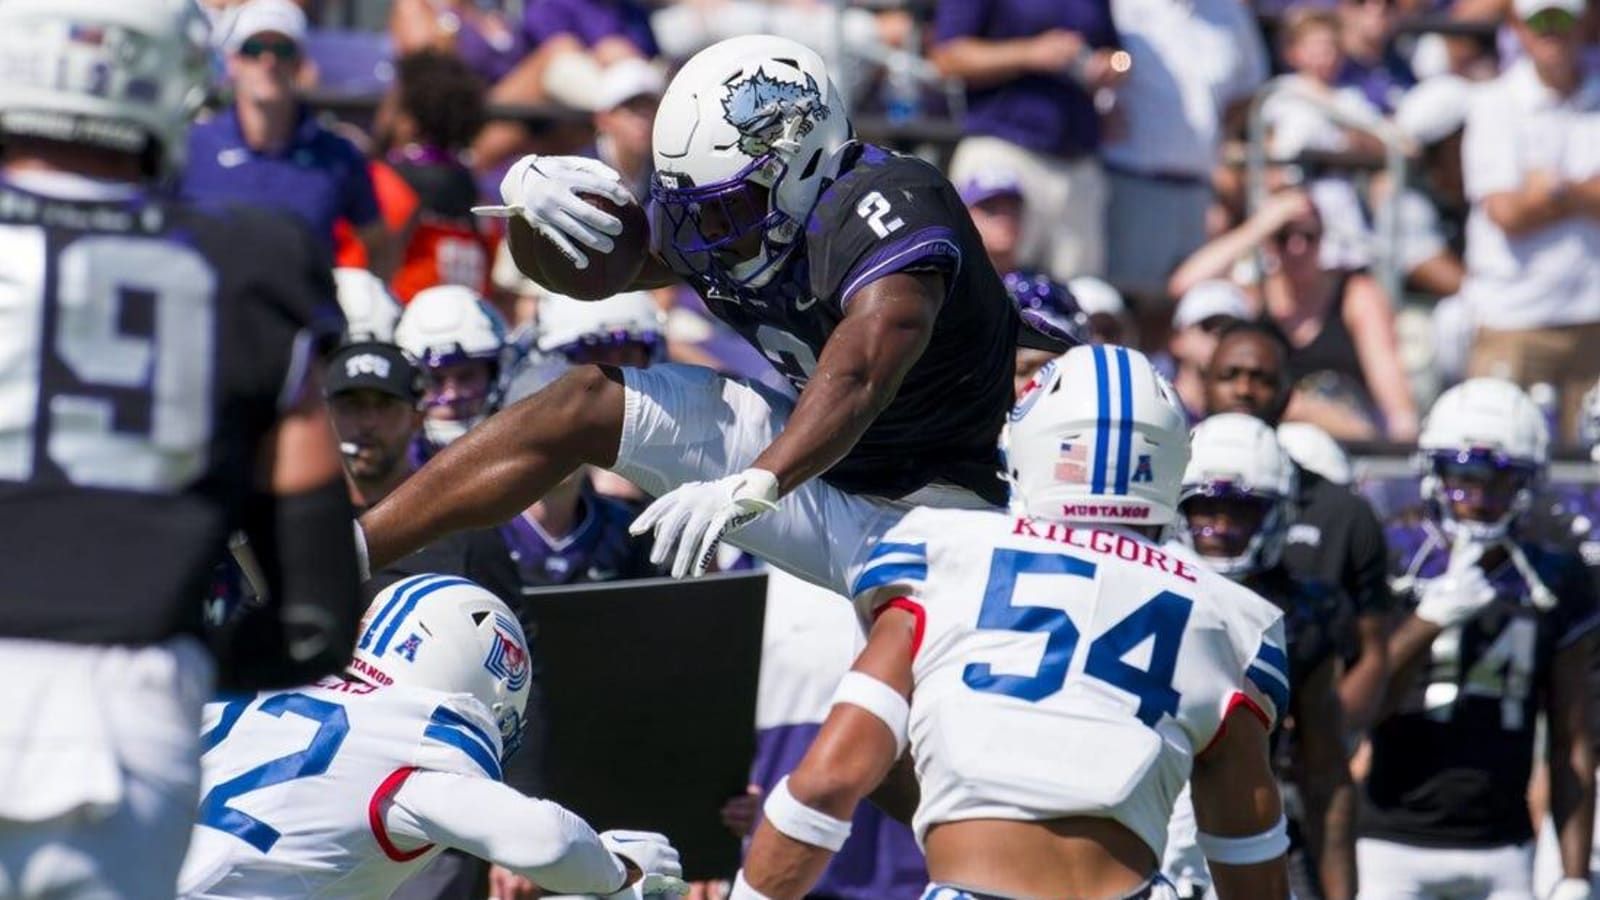 TCU takes over in second half to finish off SMU